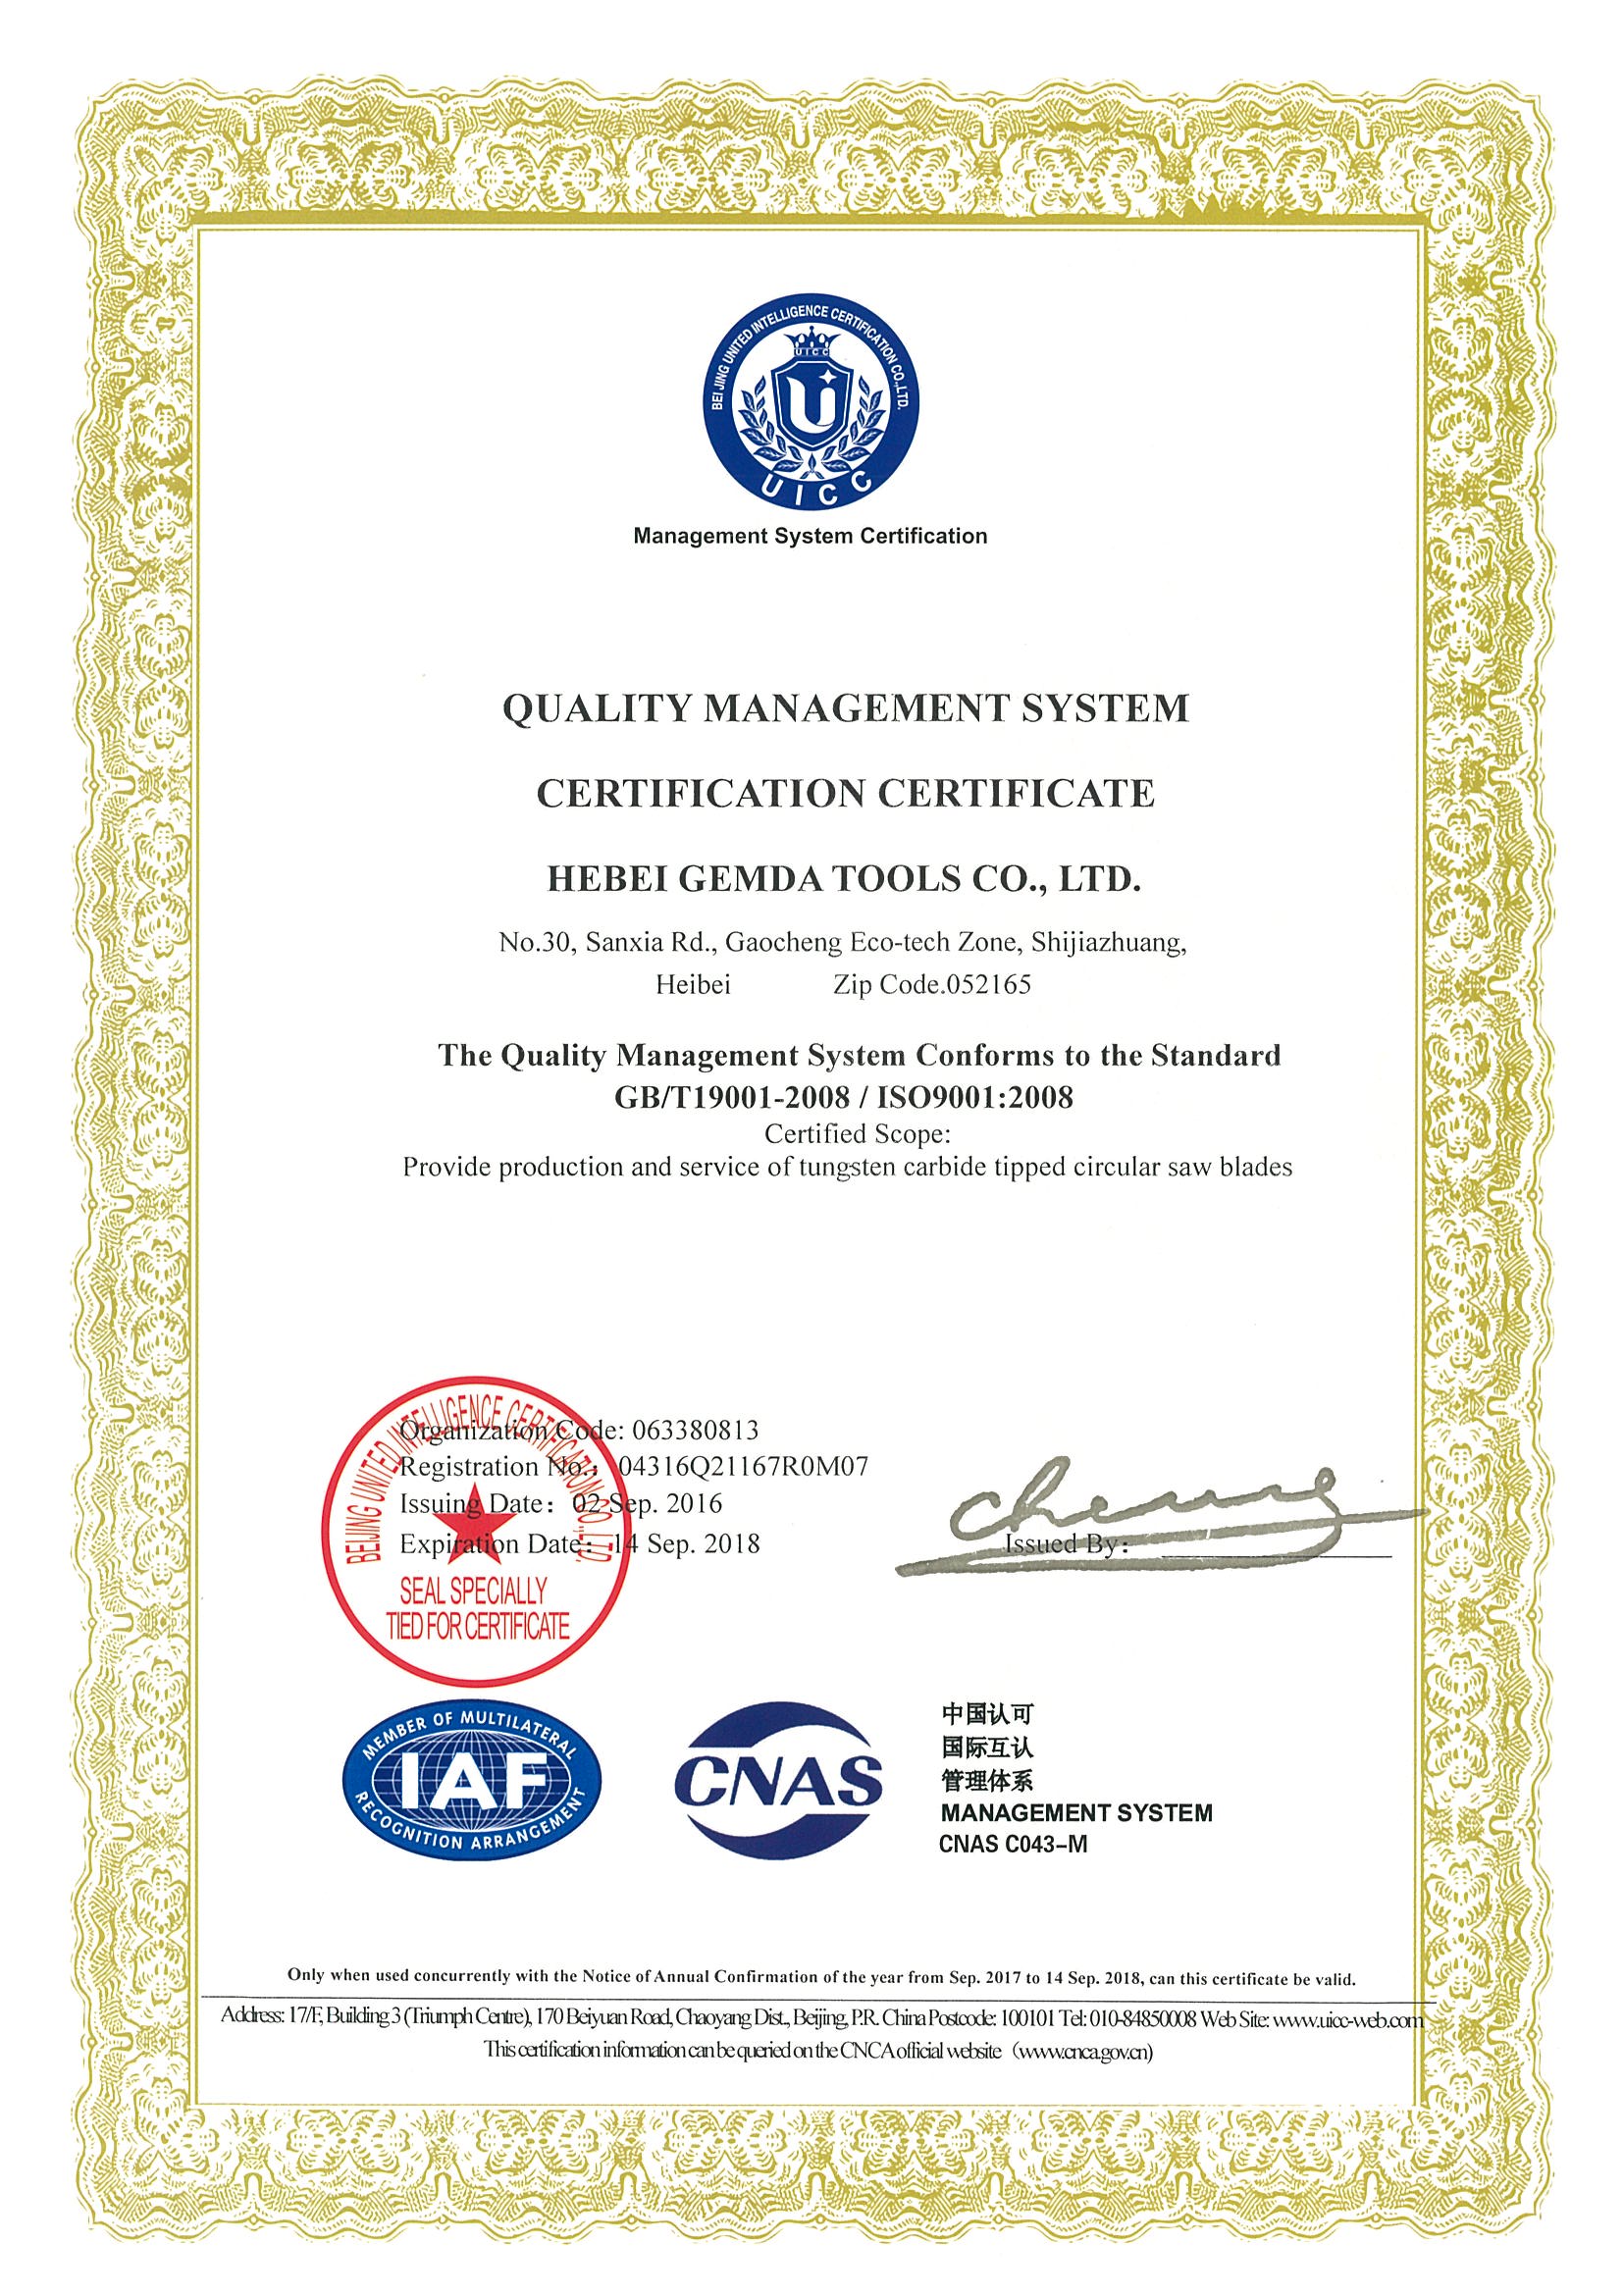 Our company successfully obtained the 9001 quality management system certification.